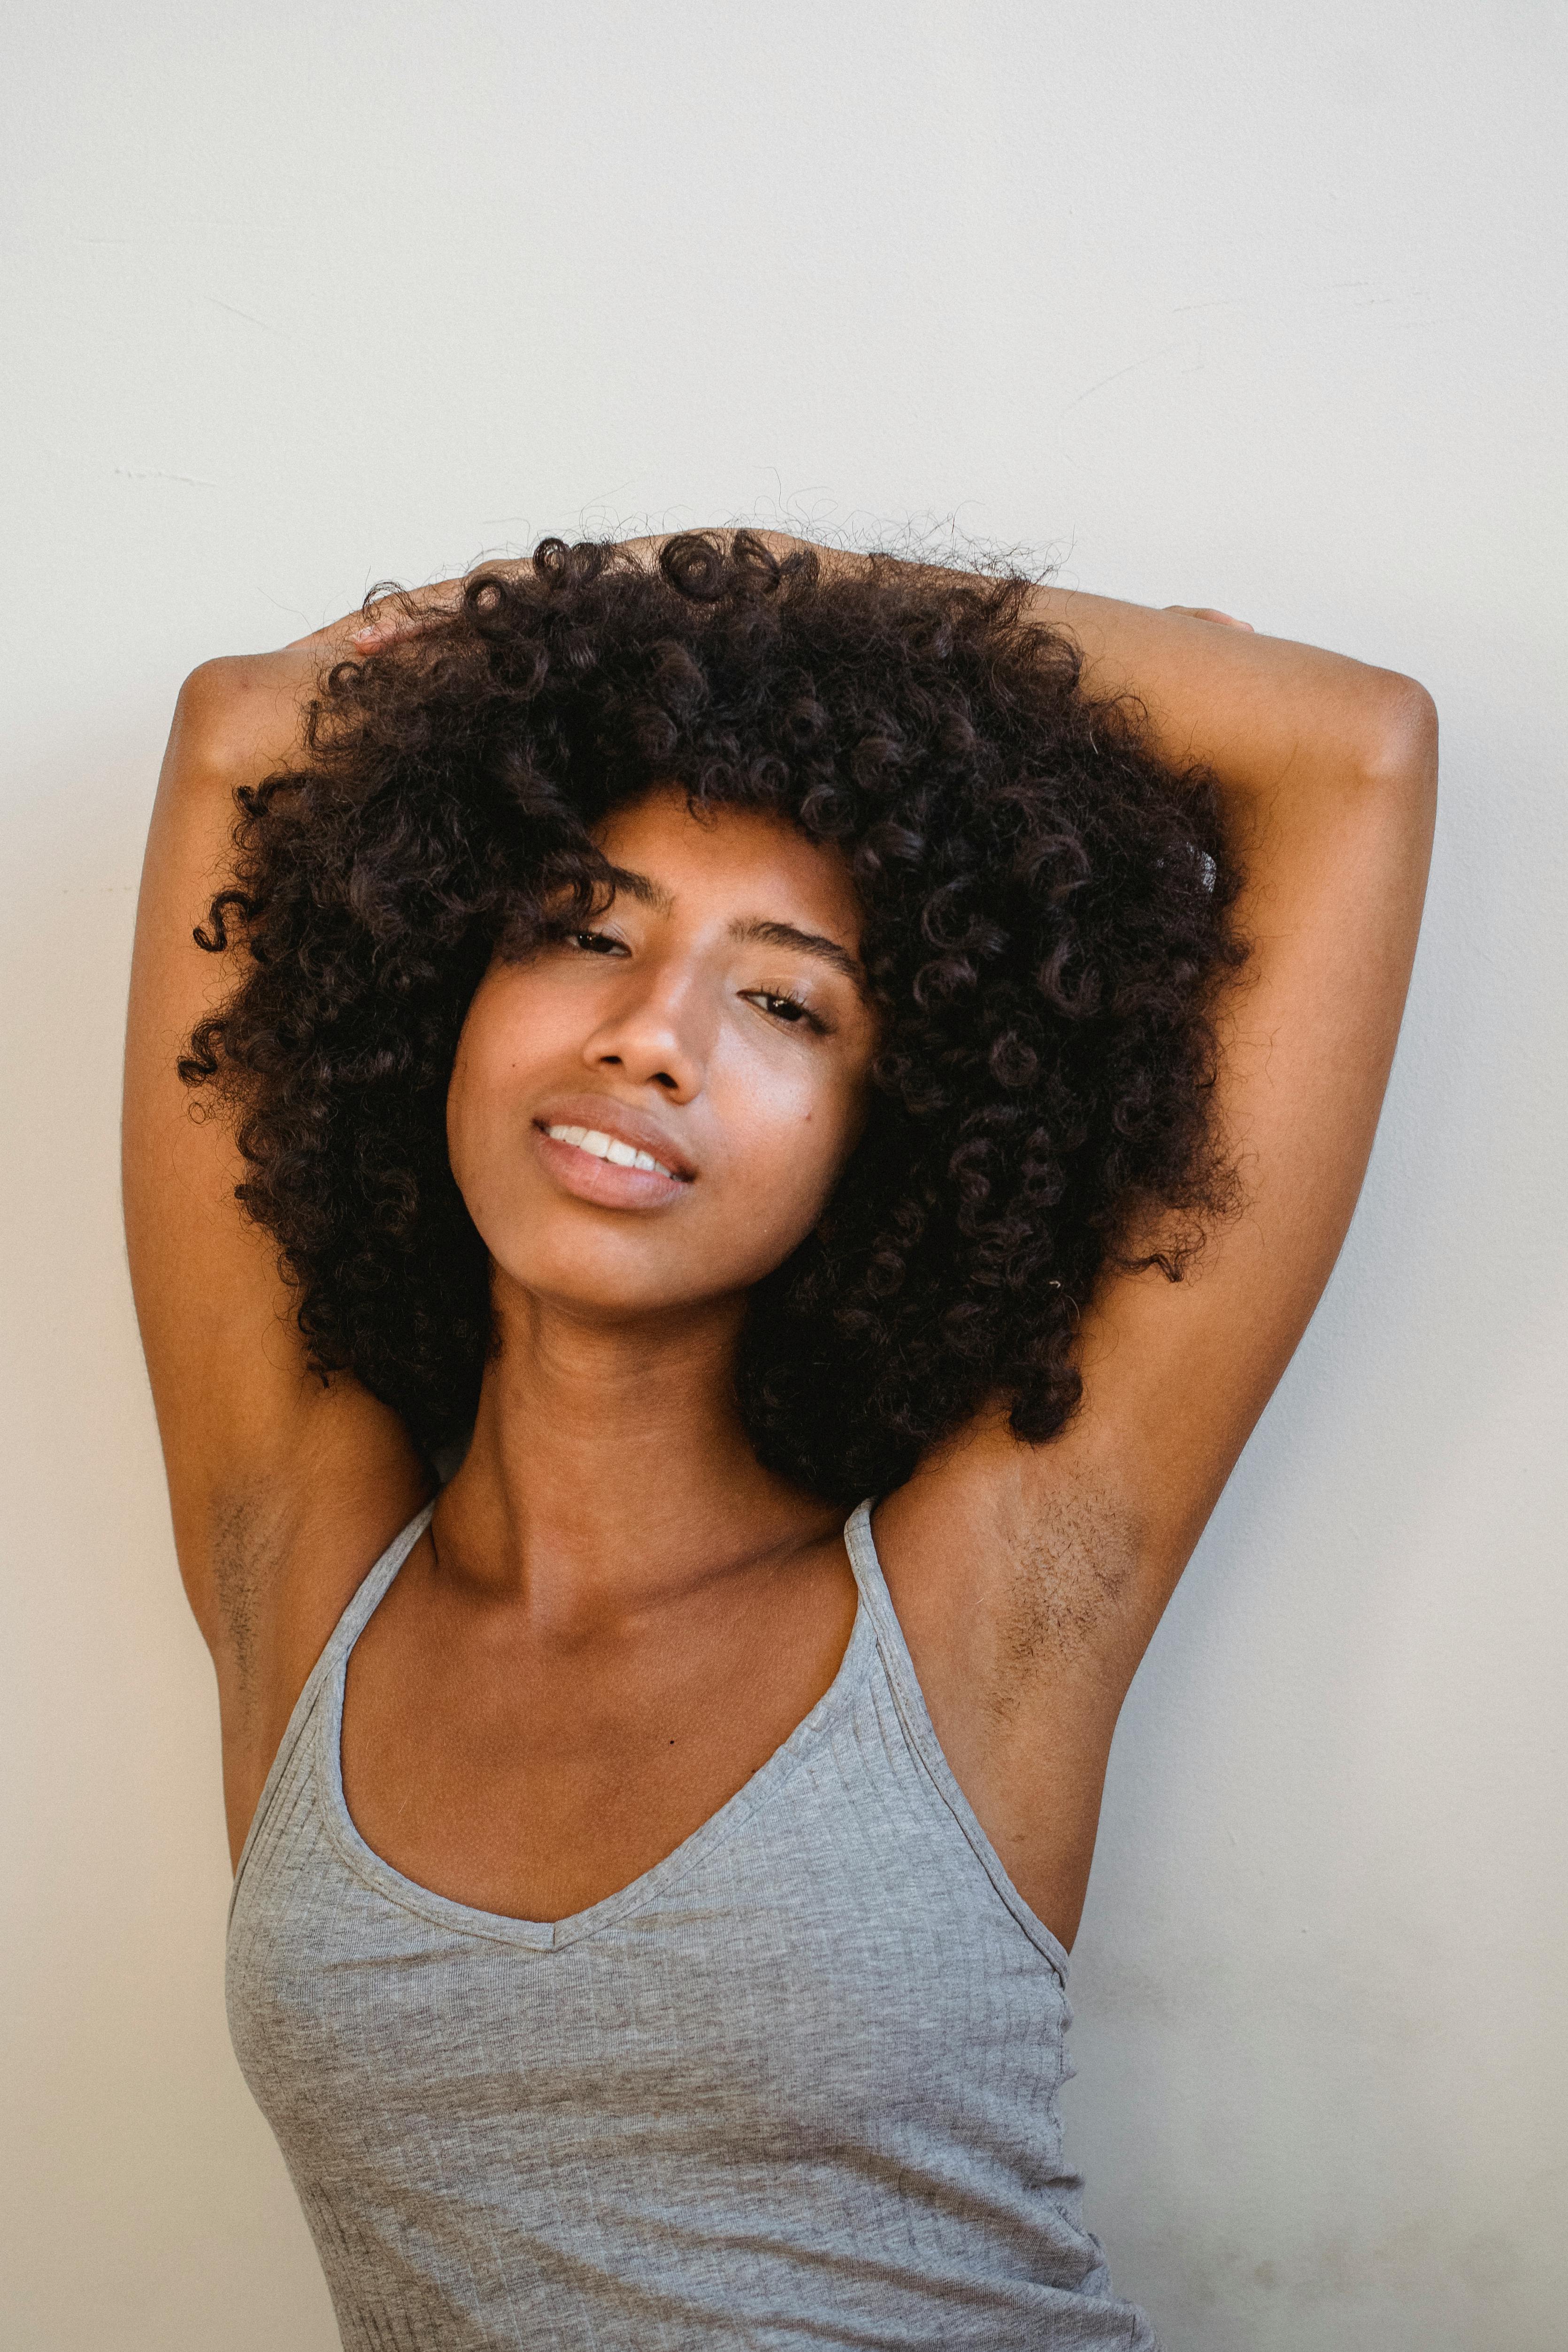 Free Photo  Relaxed smiling afro woman with fancy makeup and accessories  posing with closed eyes and crossed hands on chest, over blue wall